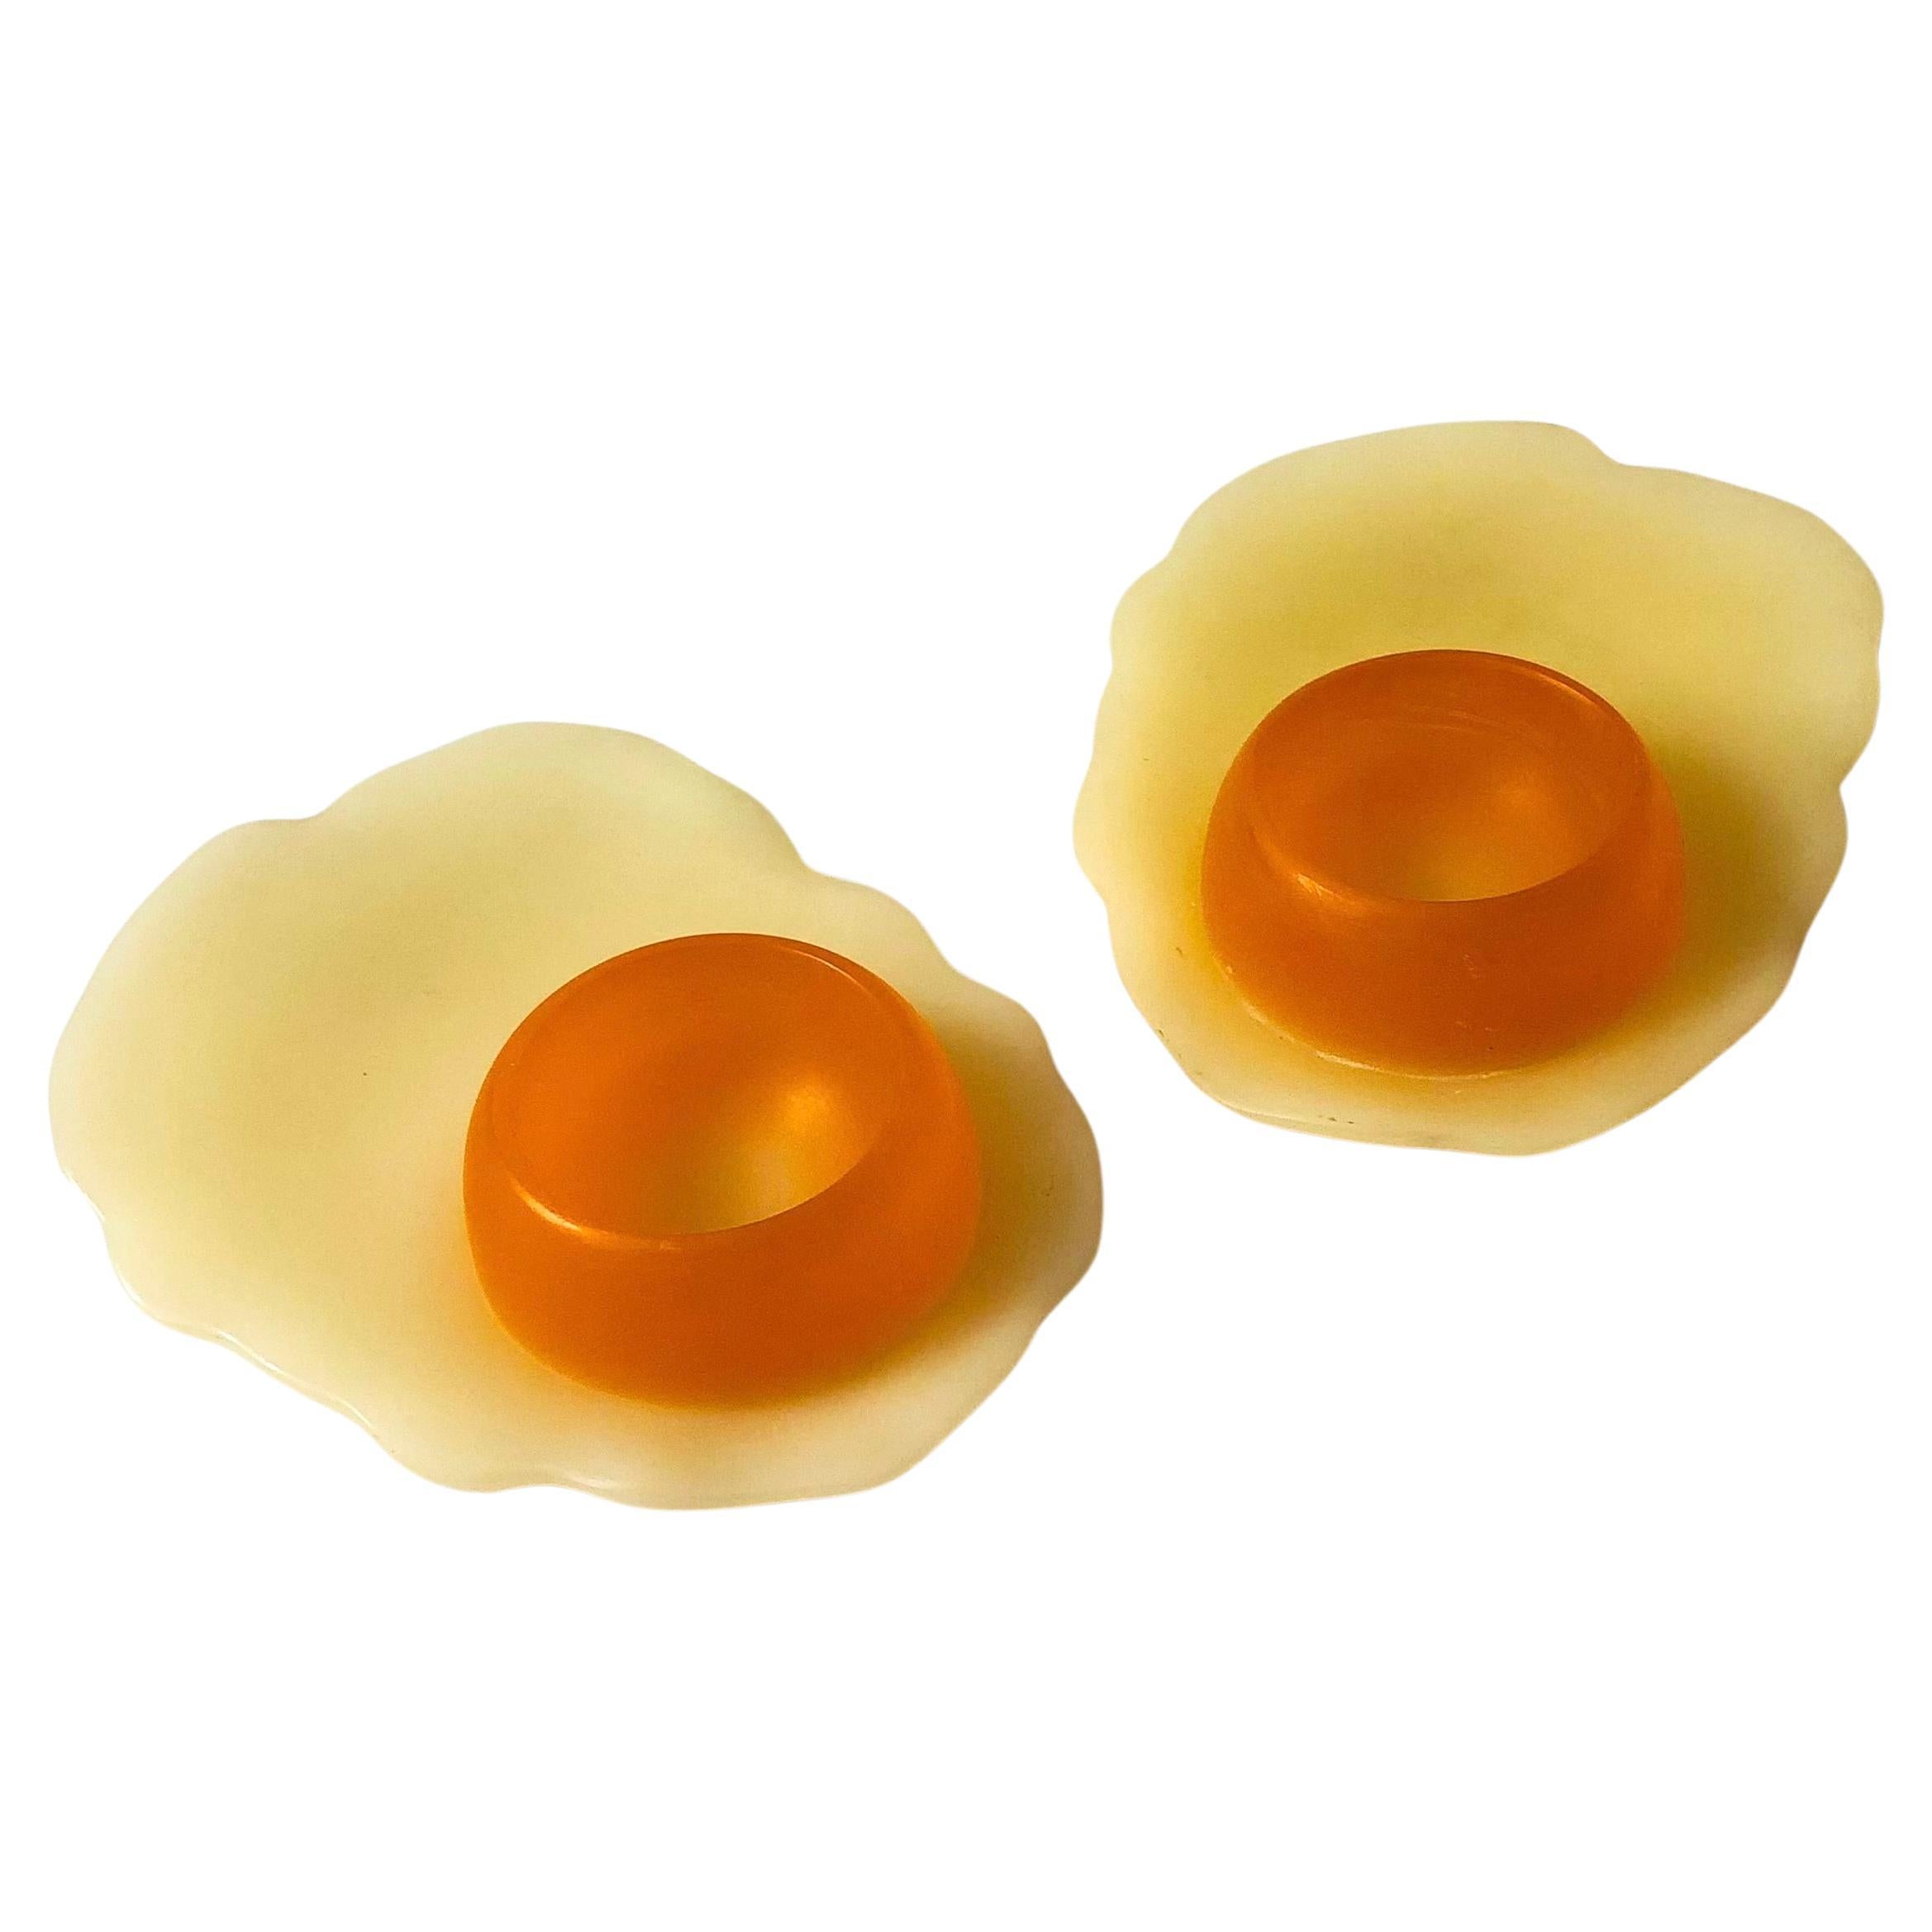 Resin Fried Egg Shaped Egg Cups or Candle Holders - Set of 2 For Sale